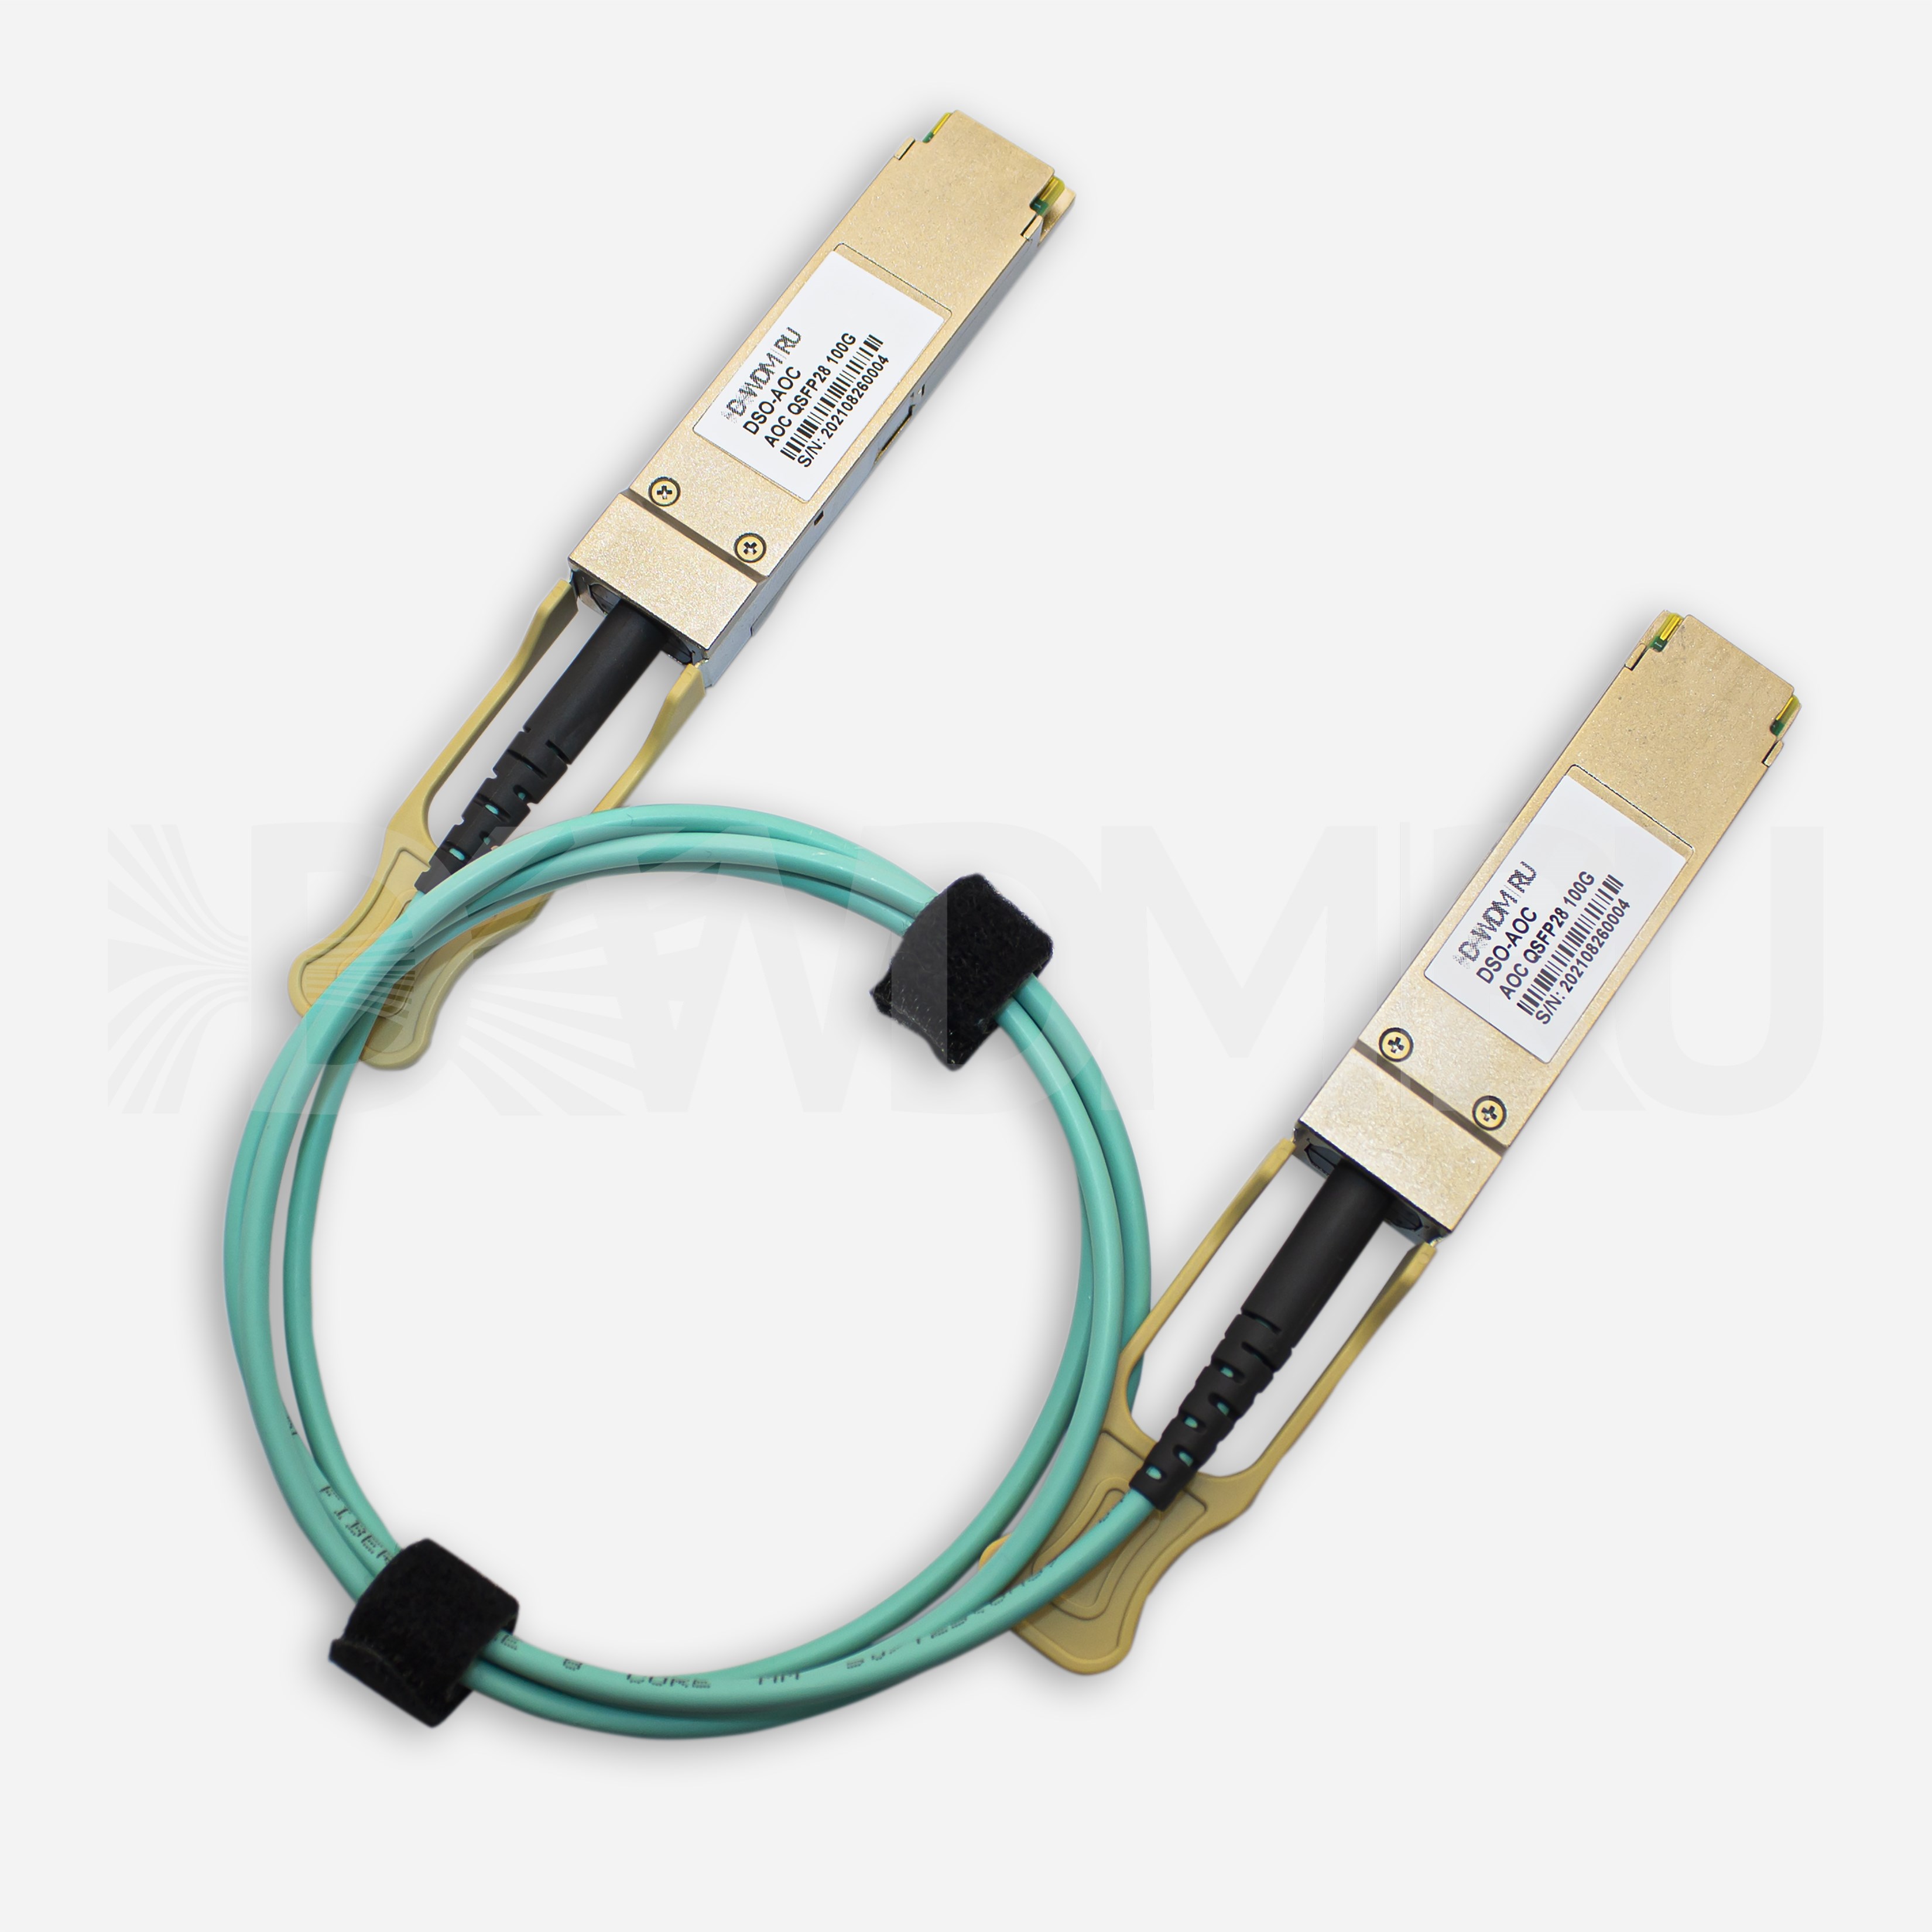 Active Optical Cable, QSFP28, 100 Гб/с, 3 м- ДВДМ.РУ (DSO-AOC-100-3)